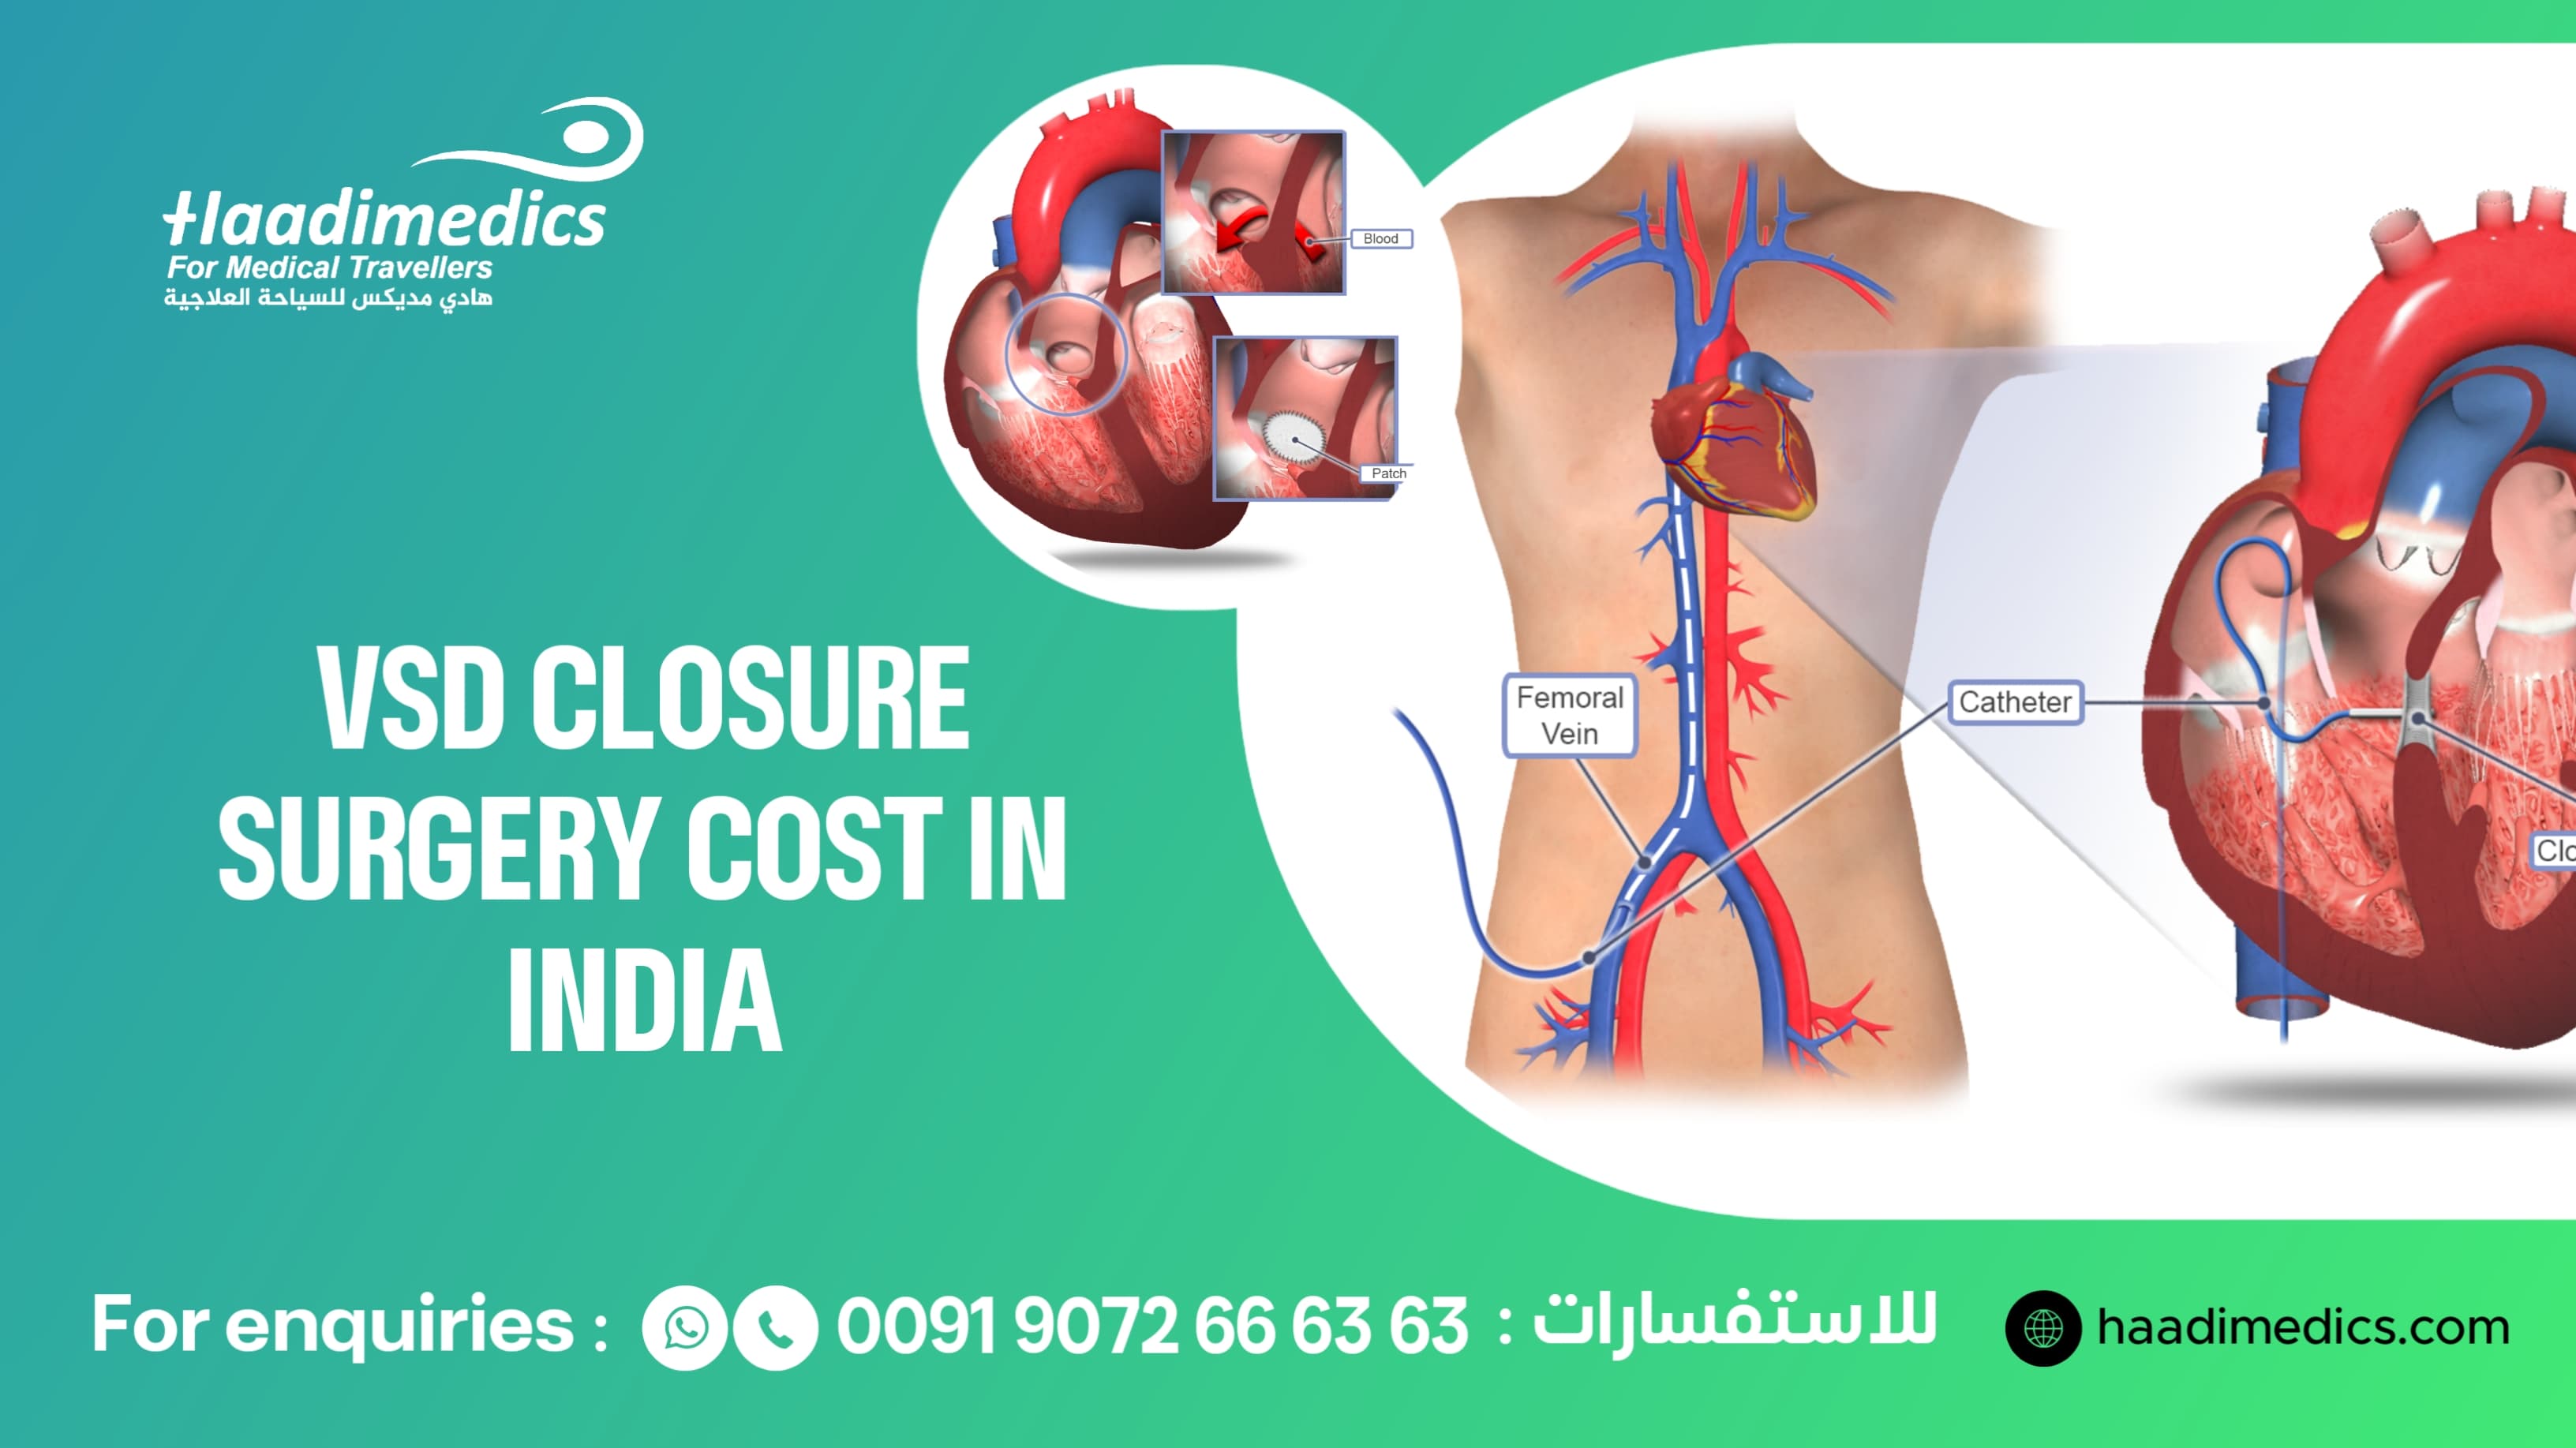 Ventricular Septal Defect (VSD) Surgery Cost in India